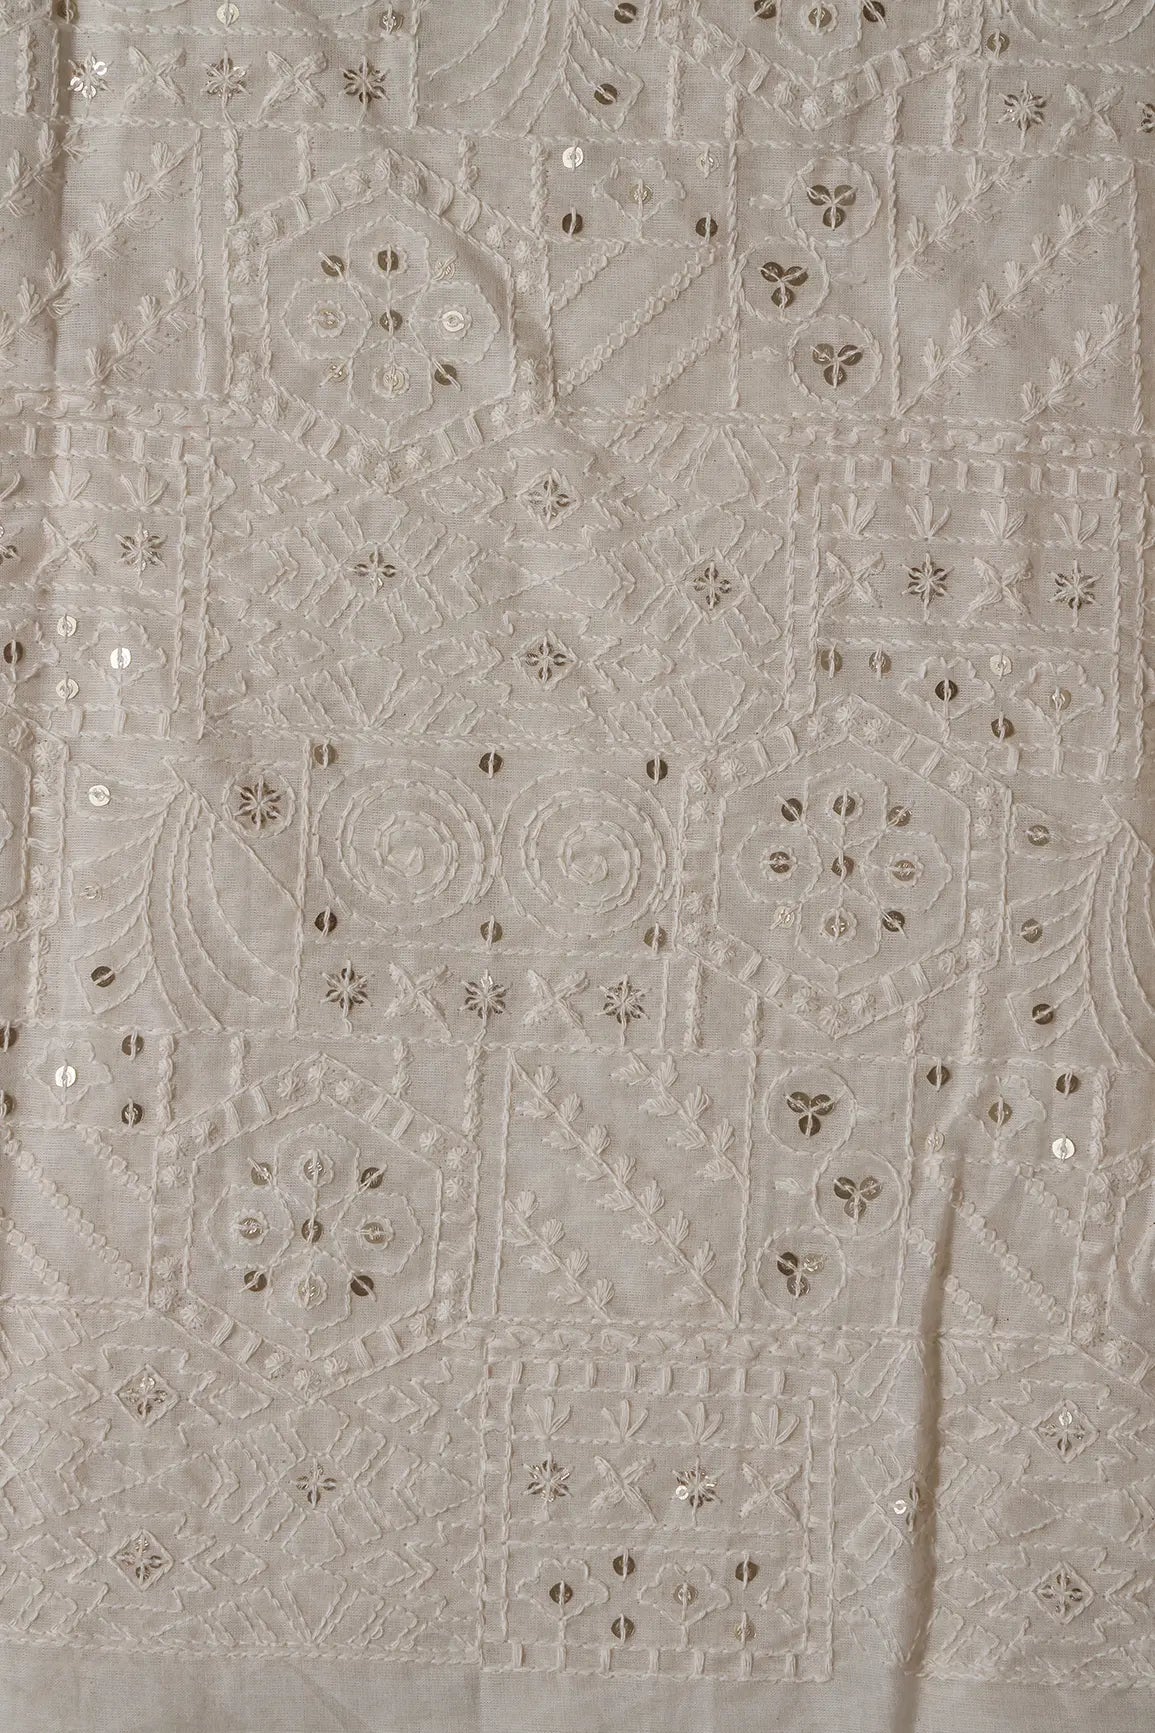 4 Meter Cut Piece Of White Thread With Sequins Geometric Embroidery Work On Off White Organic Cotton Fabric - doeraa